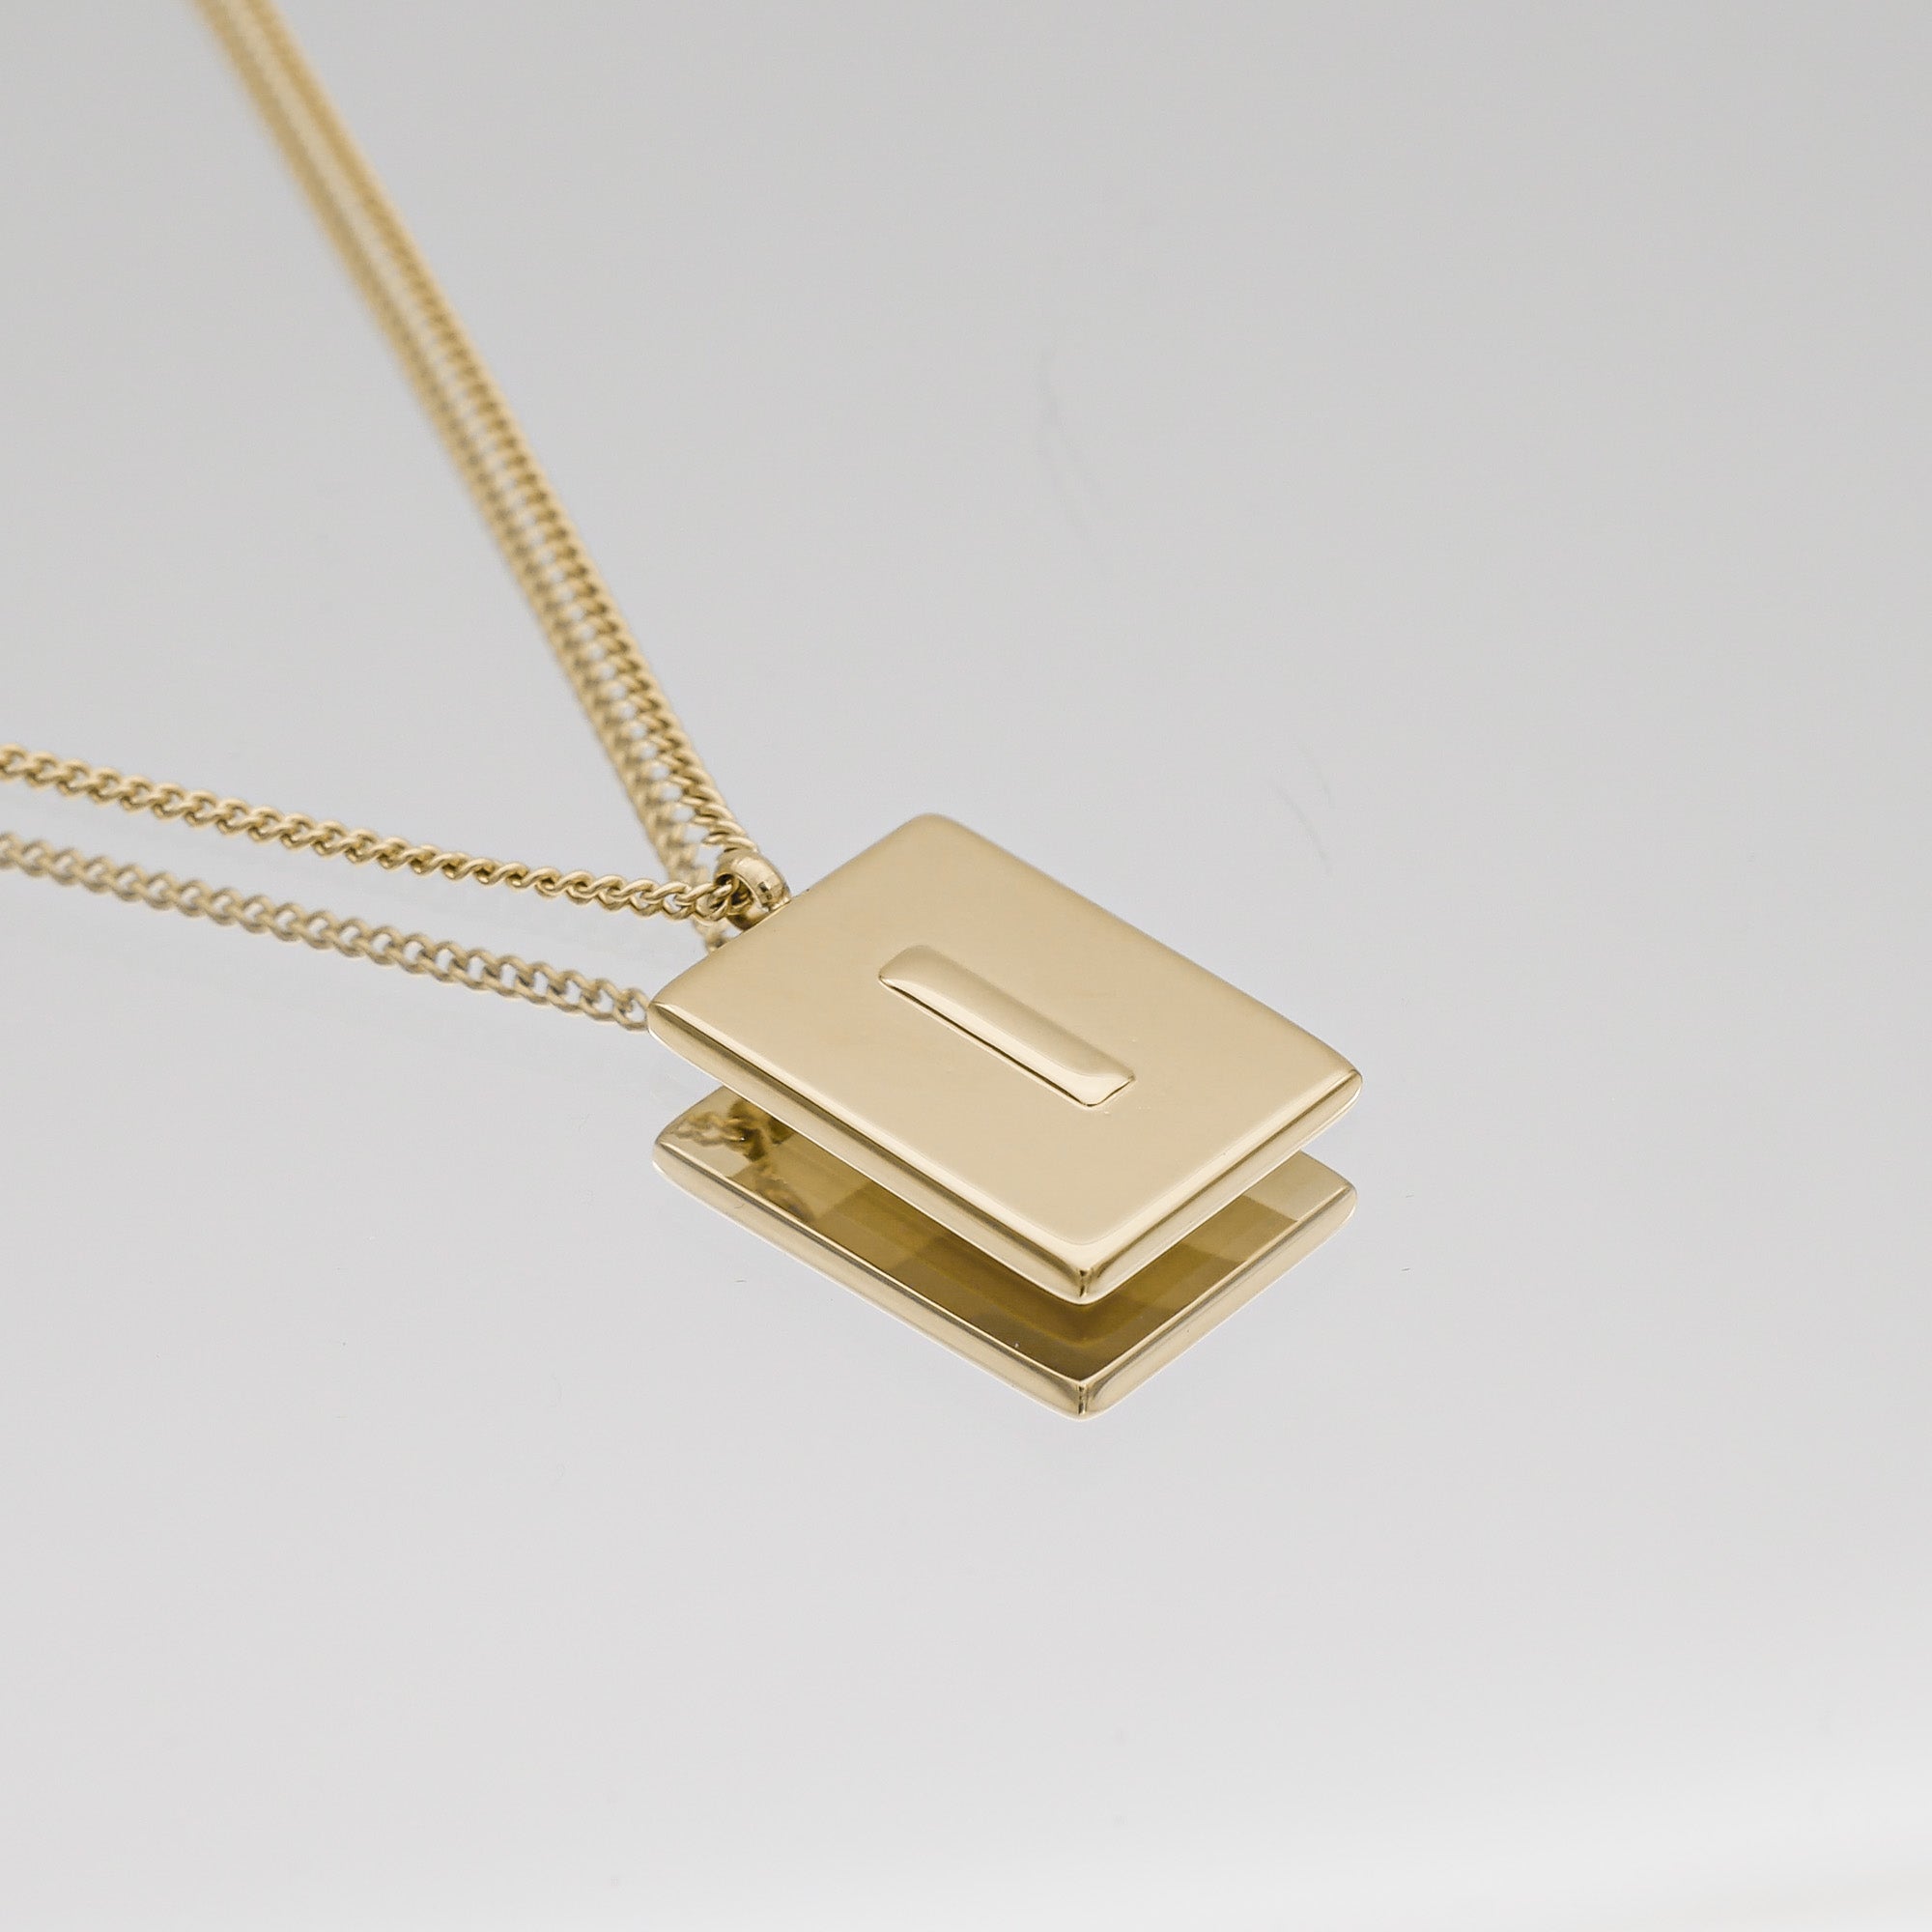 Athena custom initial Gold pendant Necklace, letter I by PRYA